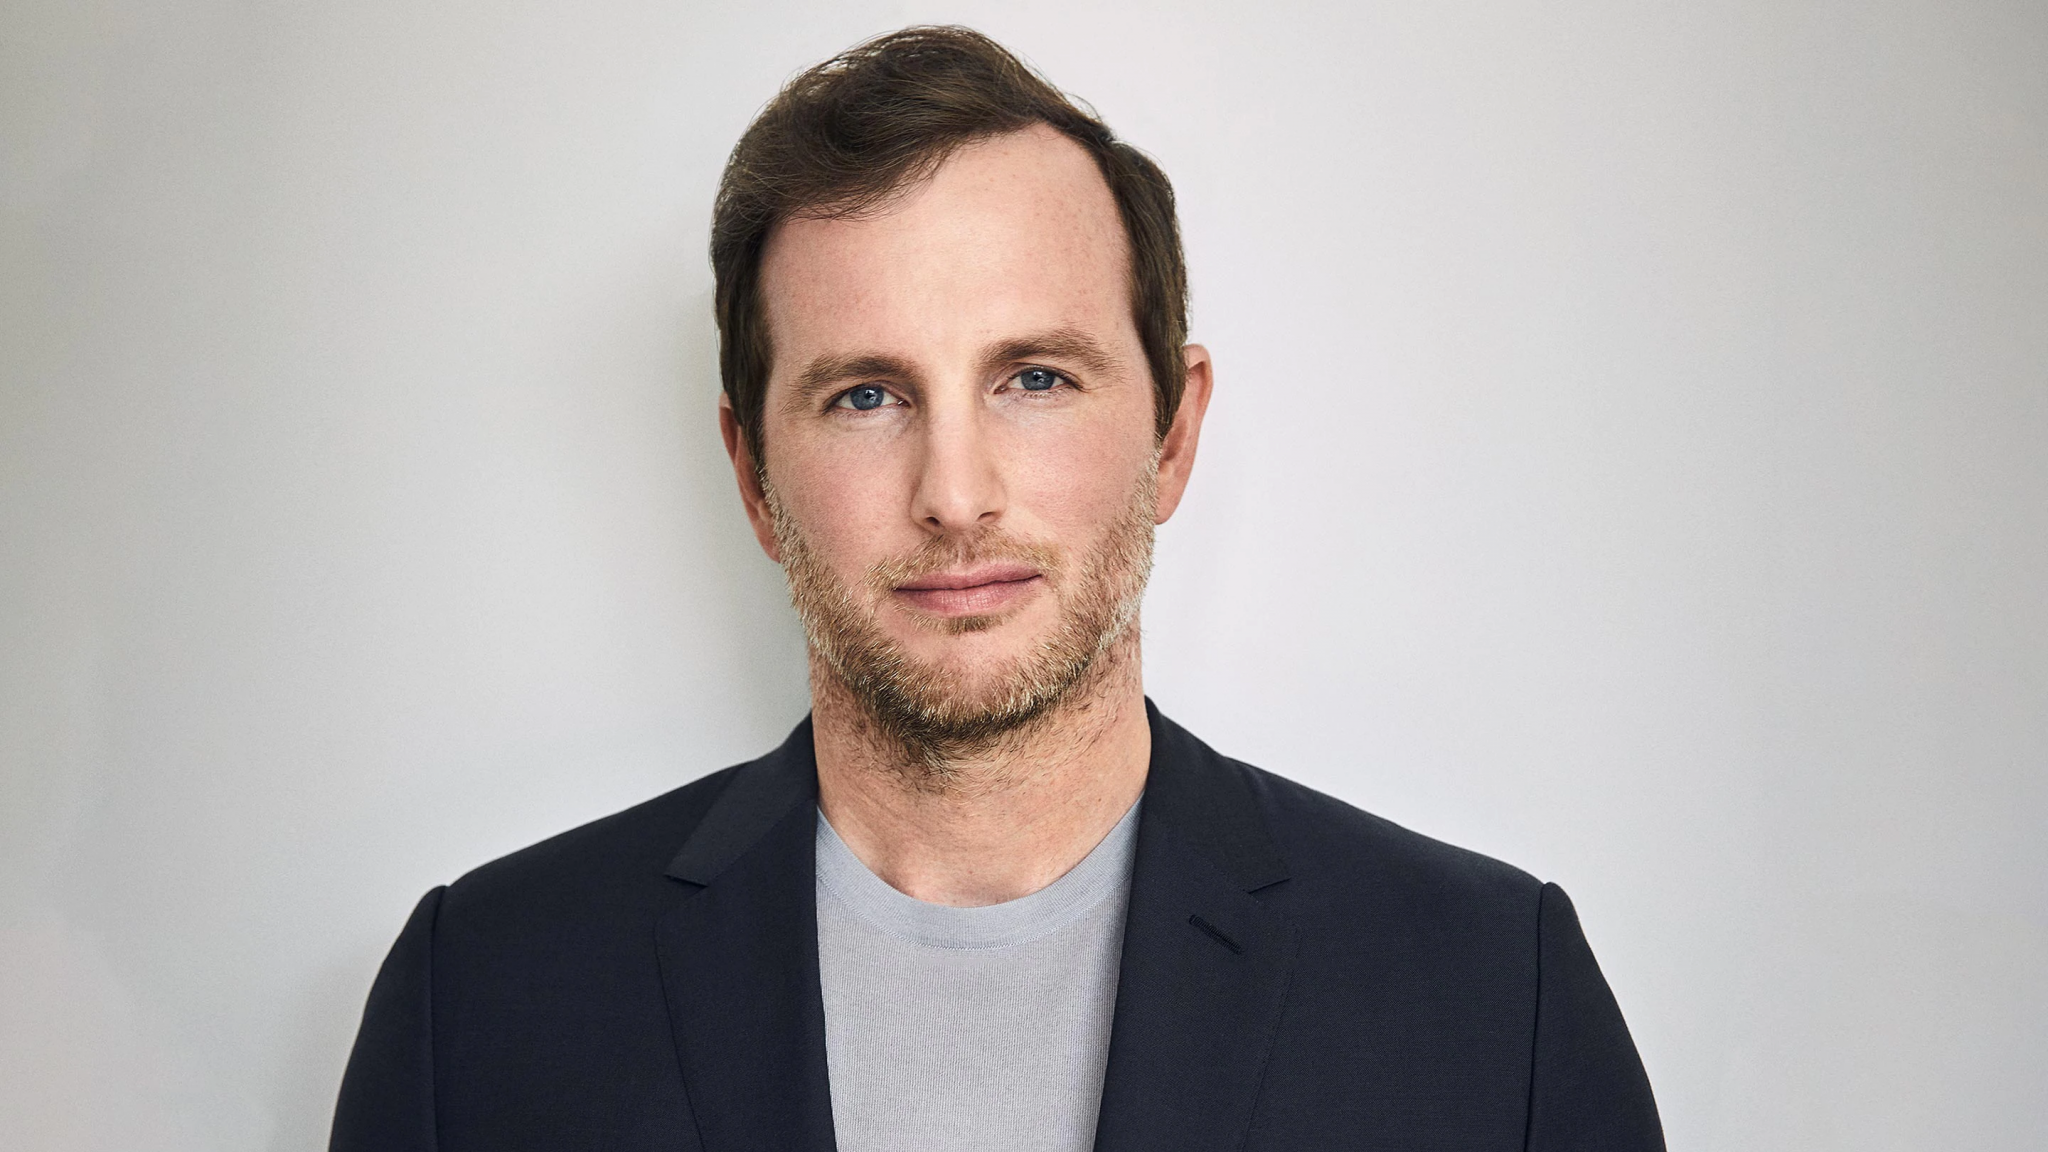 Airbnb co-founder Gebbia appointed to Board of Olympic Refuge Foundation